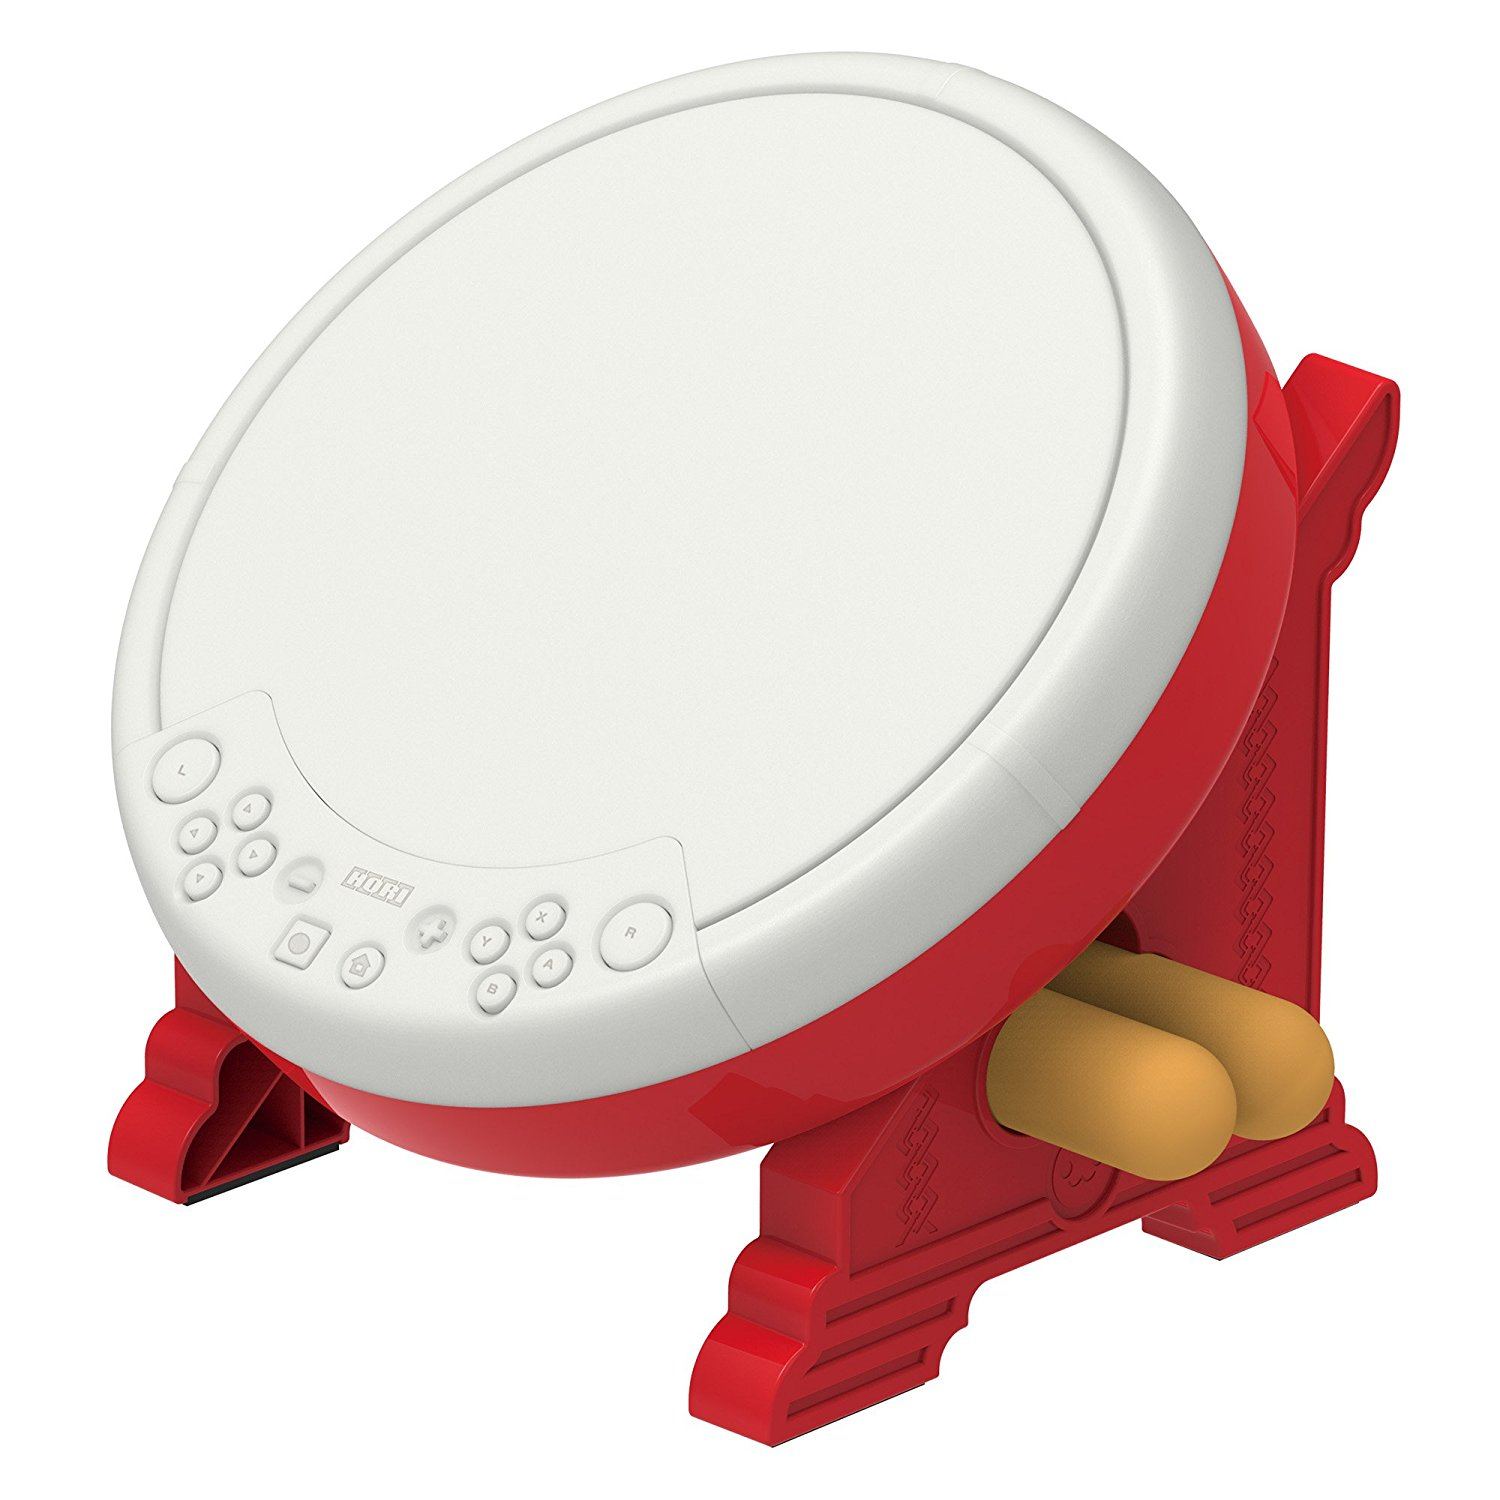 Taiko Drum Controller for Nintendo Switch for Nintendo Switch